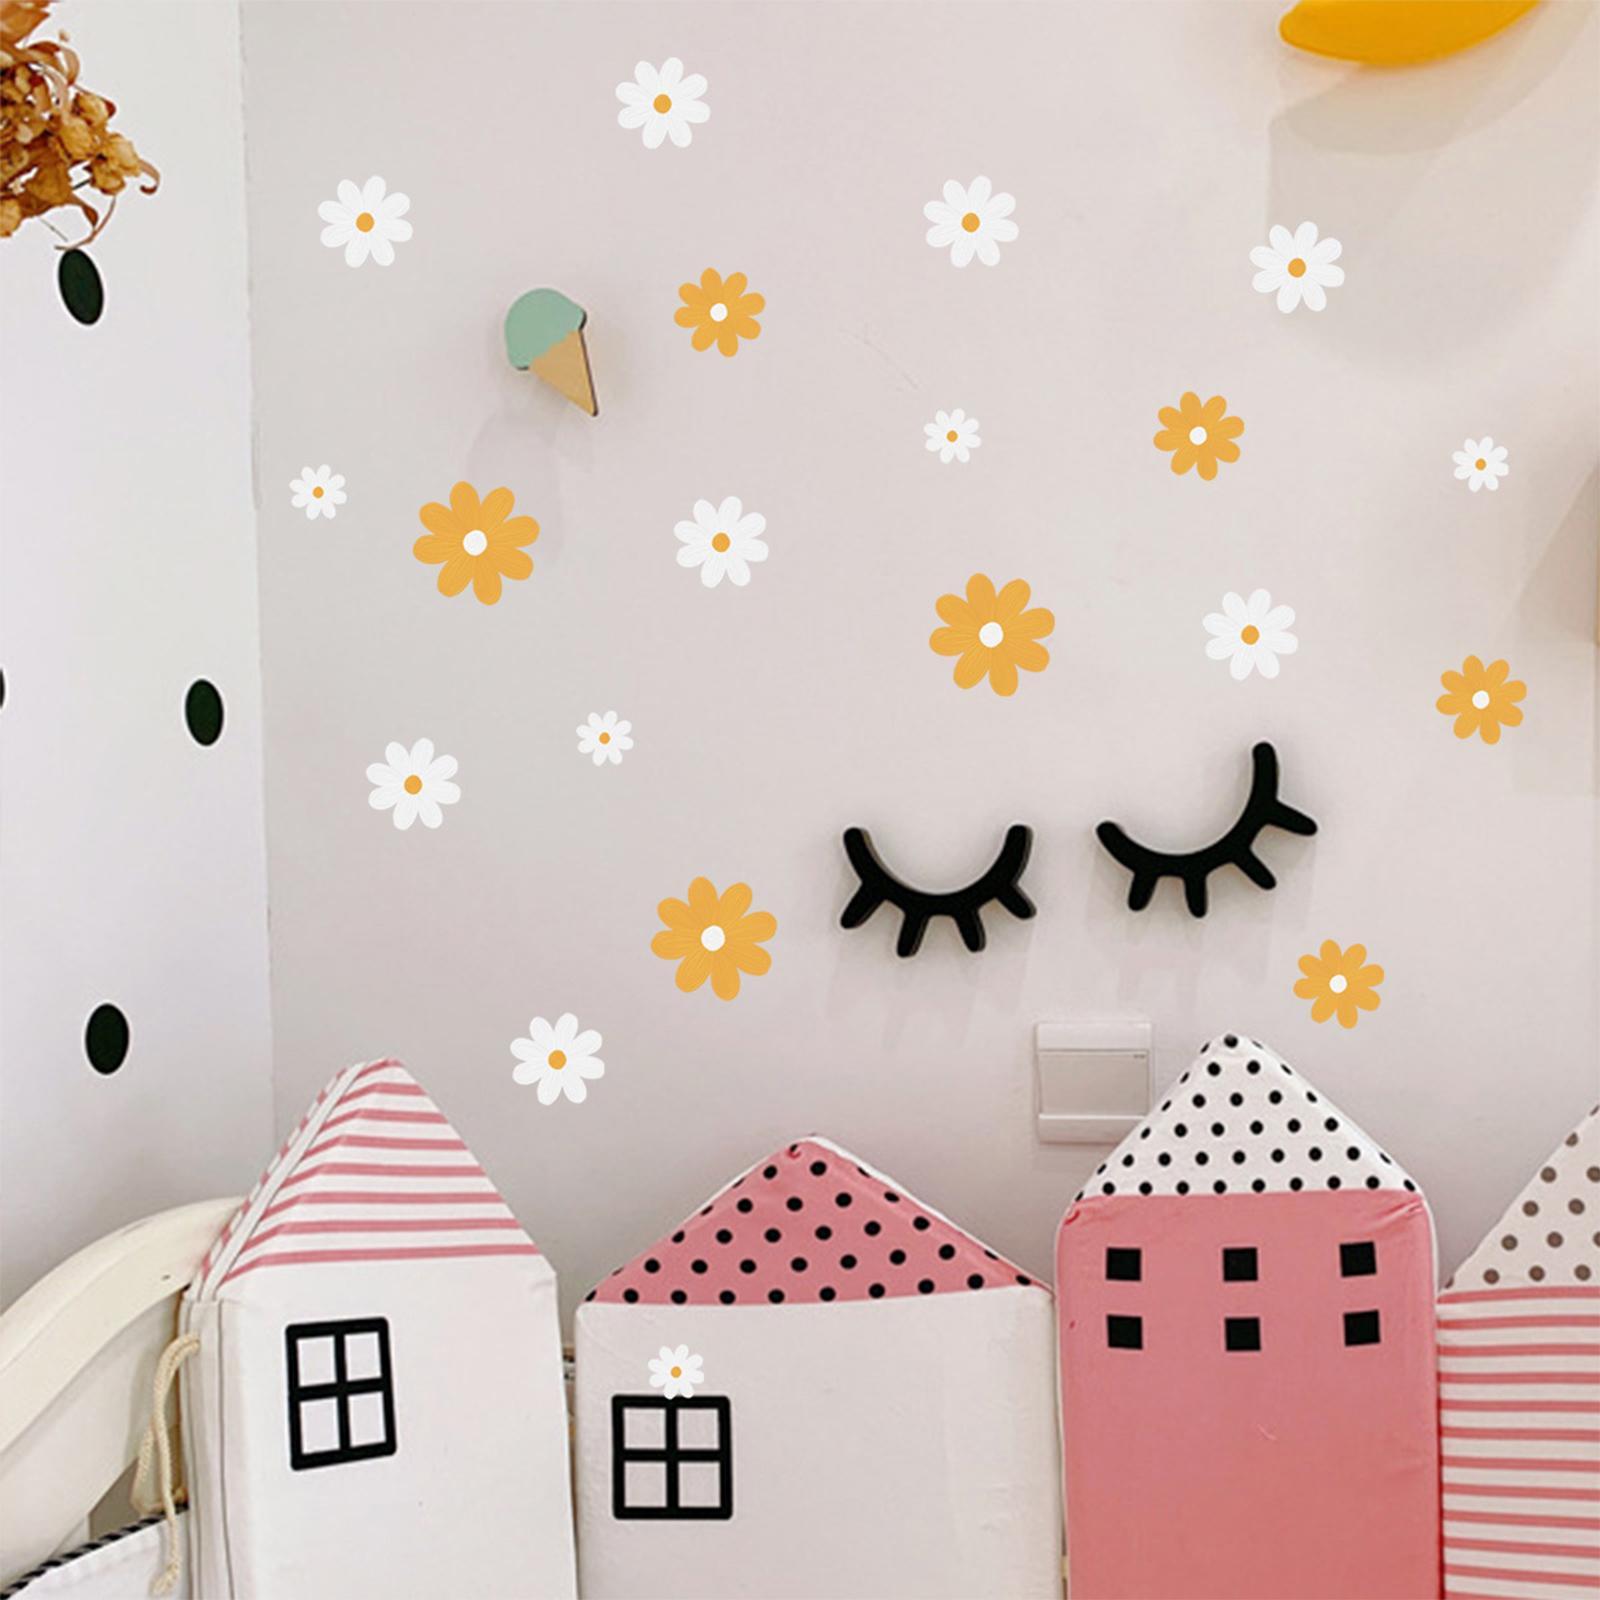 Daisy Floral Wall Stickers Vinyl Mural Art DIY Wallpaper Peel and Daisy Decals Wall Decals for Bedroom Kids Nursery Playroom Decor